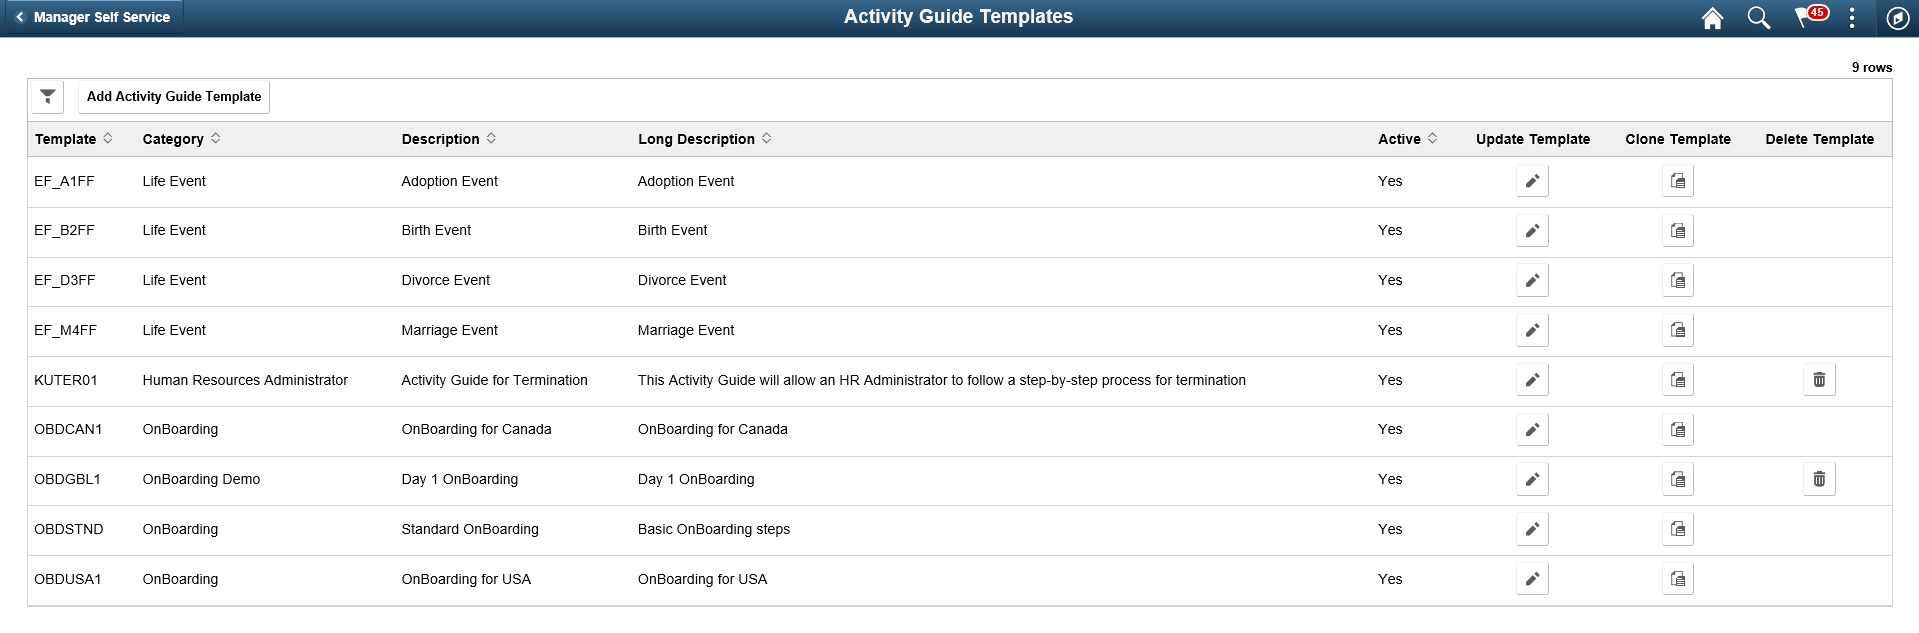 Activity Guide Templates Page